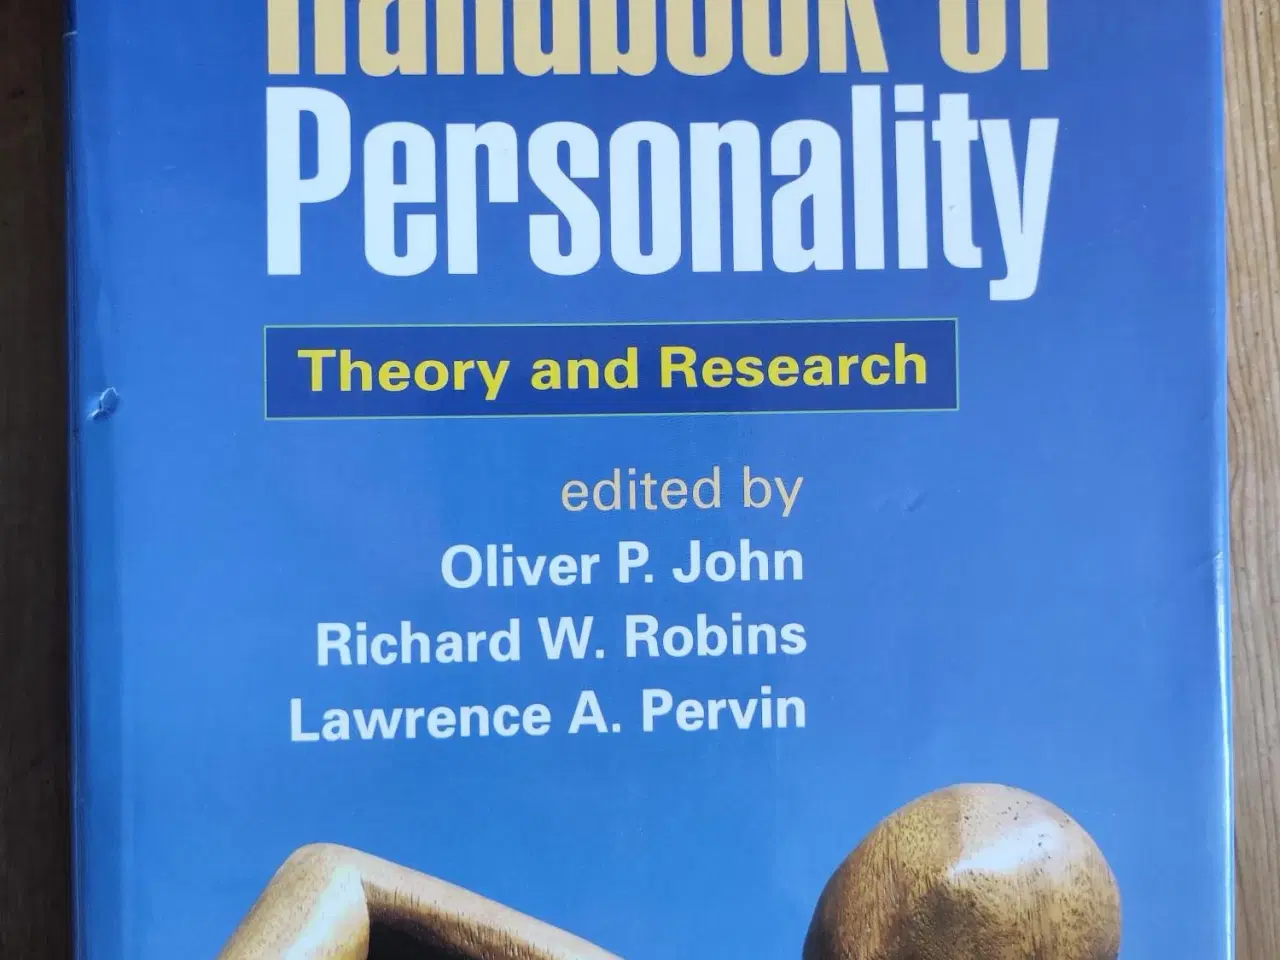 Billede 1 - Handbook of Personalty - Theory and Research